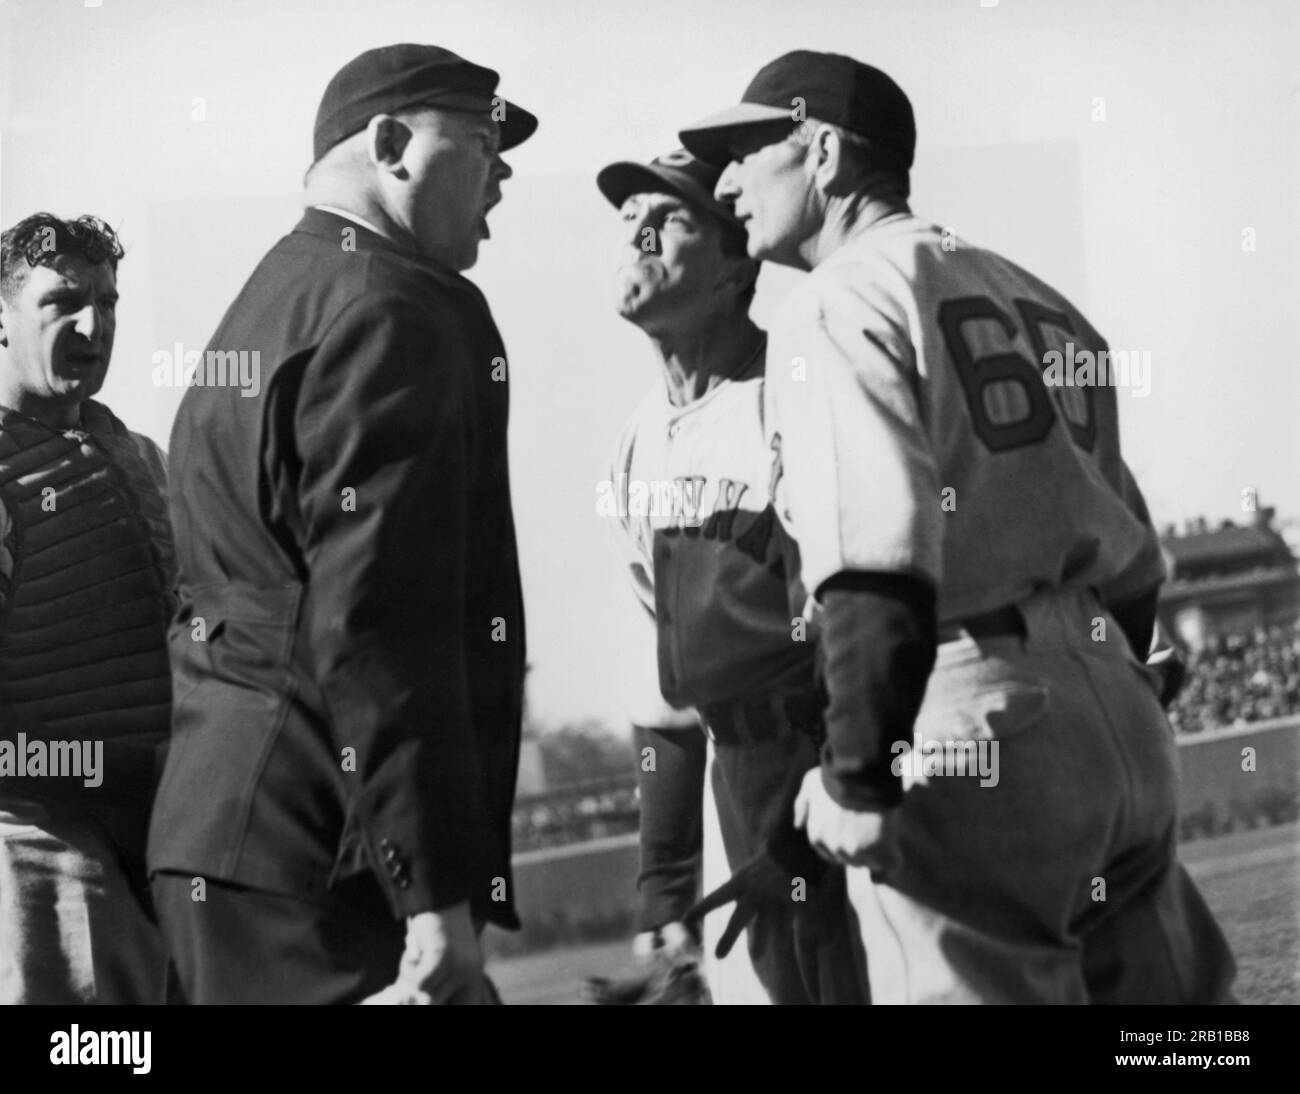 Chicago, Illinois:  April 30, 1938 At Wrigley Field, Umpire Magerkurth called it a ball, and Cincinnati Reds pitcher Joe Cascarella (center) says it was a strike with Reds manager Bill McKechnie joining in with Joe. Stock Photo